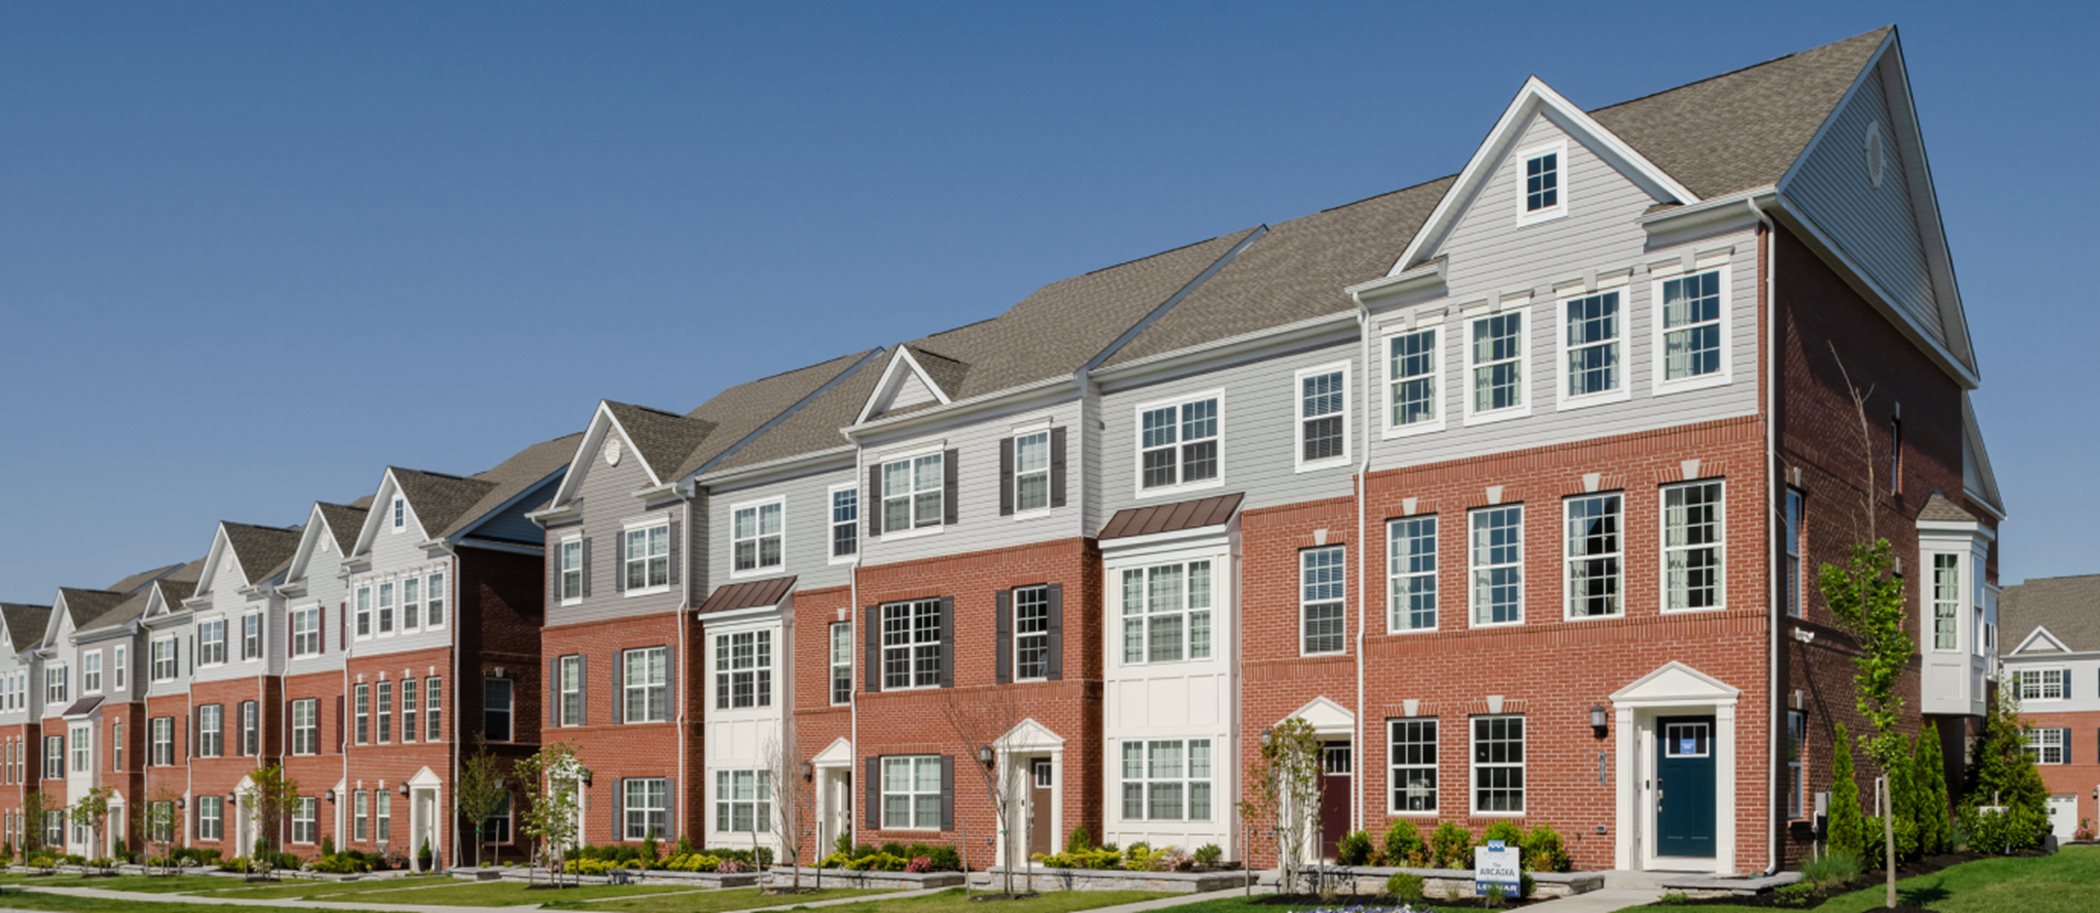 Townhome Streetscape in Delacour at Blue Stream 